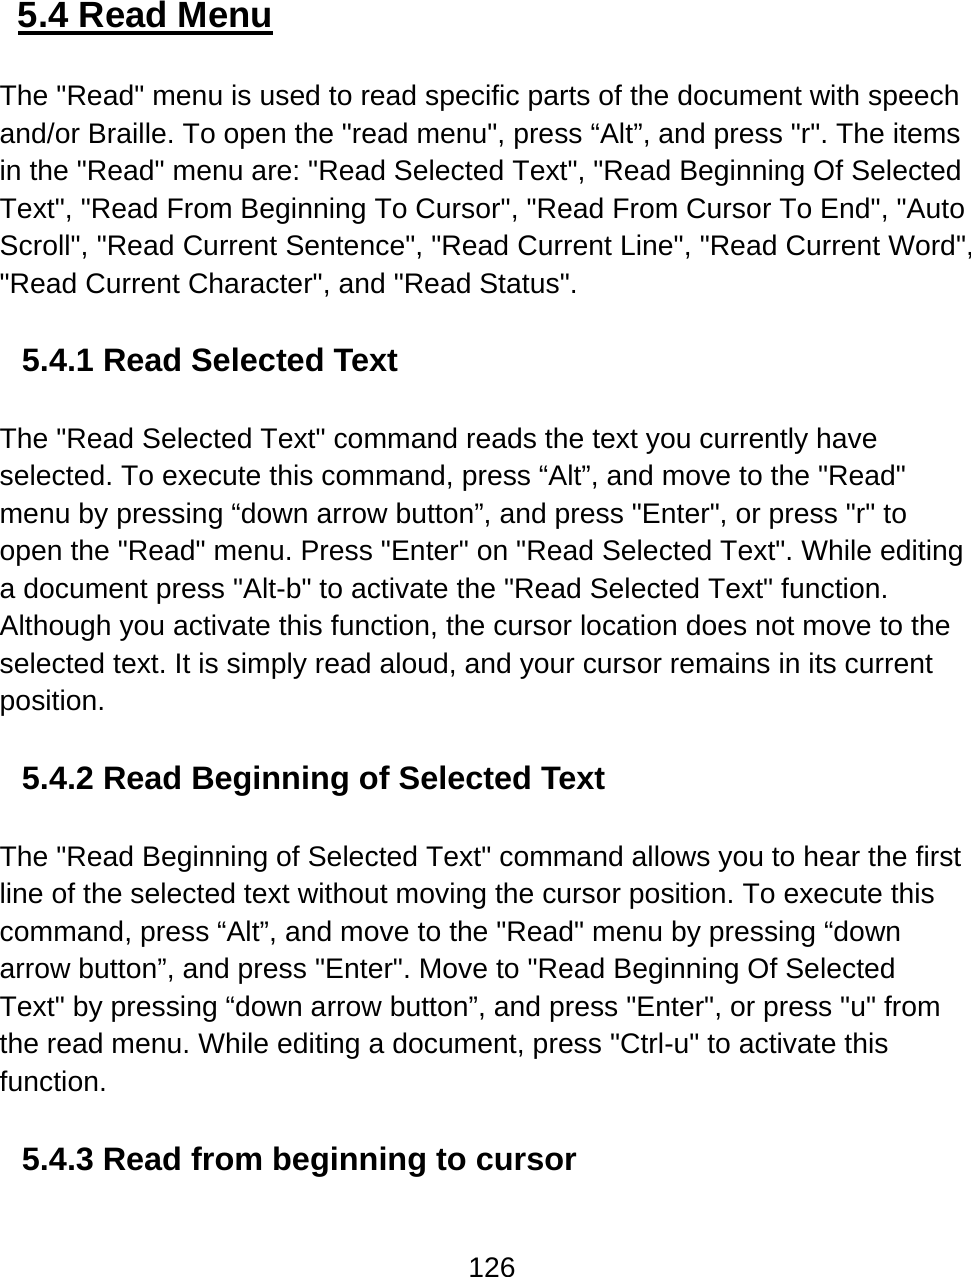 126   5.4 Read Menu  The &quot;Read&quot; menu is used to read specific parts of the document with speech and/or Braille. To open the &quot;read menu&quot;, press “Alt”, and press &quot;r&quot;. The items in the &quot;Read&quot; menu are: &quot;Read Selected Text&quot;, &quot;Read Beginning Of Selected Text&quot;, &quot;Read From Beginning To Cursor&quot;, &quot;Read From Cursor To End&quot;, &quot;Auto Scroll&quot;, &quot;Read Current Sentence&quot;, &quot;Read Current Line&quot;, &quot;Read Current Word&quot;, &quot;Read Current Character&quot;, and &quot;Read Status&quot;.  5.4.1 Read Selected Text  The &quot;Read Selected Text&quot; command reads the text you currently have selected. To execute this command, press “Alt”, and move to the &quot;Read&quot; menu by pressing “down arrow button”, and press &quot;Enter&quot;, or press &quot;r&quot; to open the &quot;Read&quot; menu. Press &quot;Enter&quot; on &quot;Read Selected Text&quot;. While editing a document press &quot;Alt-b&quot; to activate the &quot;Read Selected Text&quot; function. Although you activate this function, the cursor location does not move to the selected text. It is simply read aloud, and your cursor remains in its current position.   5.4.2 Read Beginning of Selected Text  The &quot;Read Beginning of Selected Text&quot; command allows you to hear the first line of the selected text without moving the cursor position. To execute this command, press “Alt”, and move to the &quot;Read&quot; menu by pressing “down arrow button”, and press &quot;Enter&quot;. Move to &quot;Read Beginning Of Selected Text&quot; by pressing “down arrow button”, and press &quot;Enter&quot;, or press &quot;u&quot; from the read menu. While editing a document, press &quot;Ctrl-u&quot; to activate this function.   5.4.3 Read from beginning to cursor  